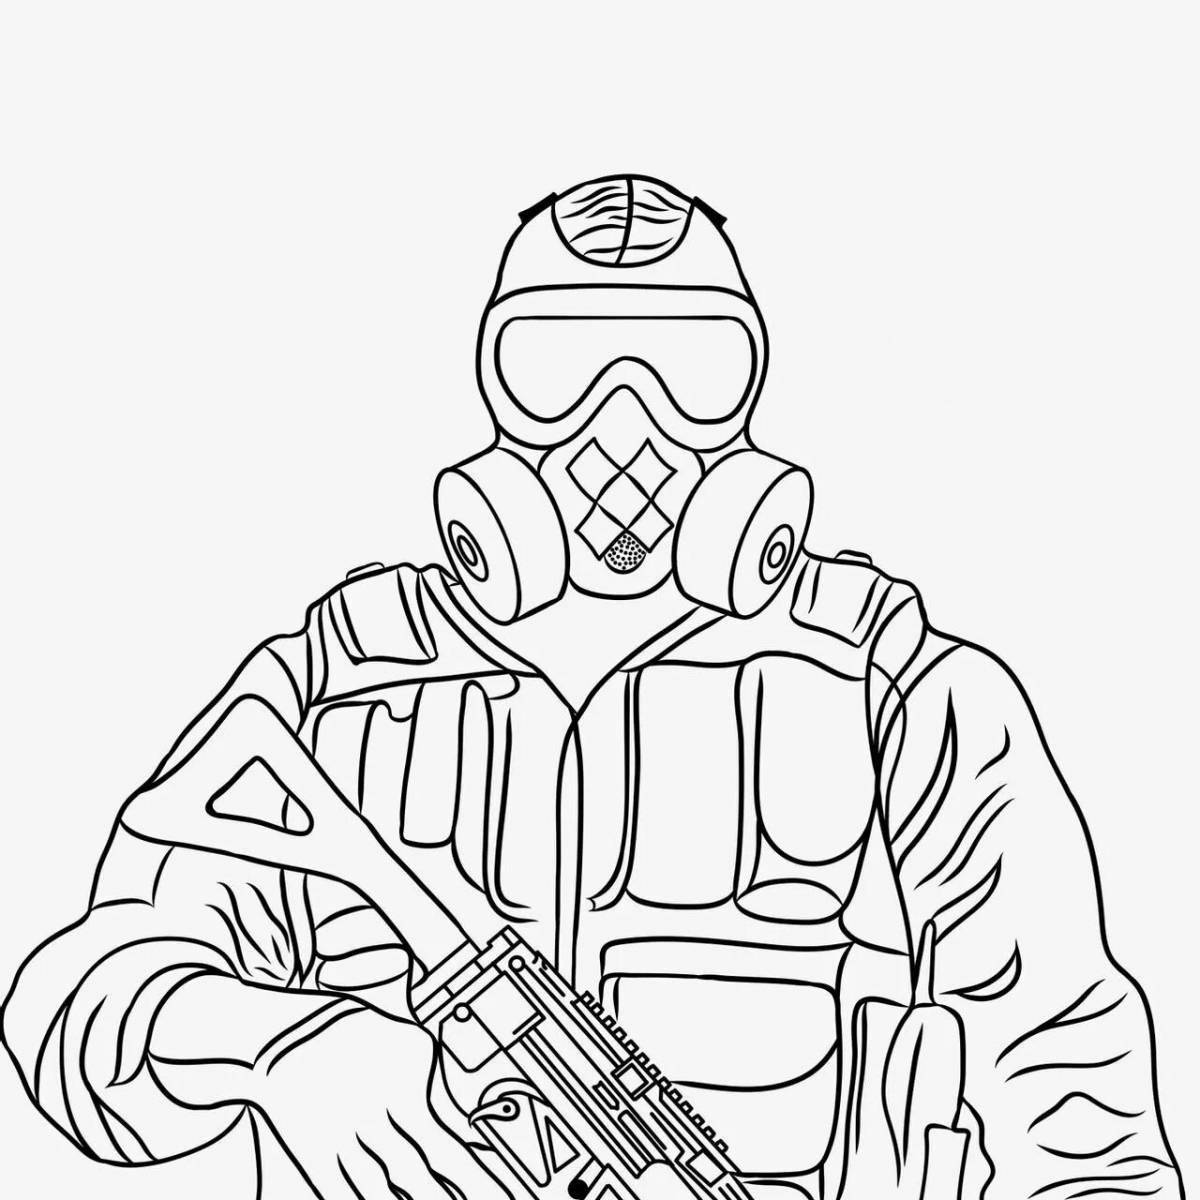 Radiant cs go coloring template